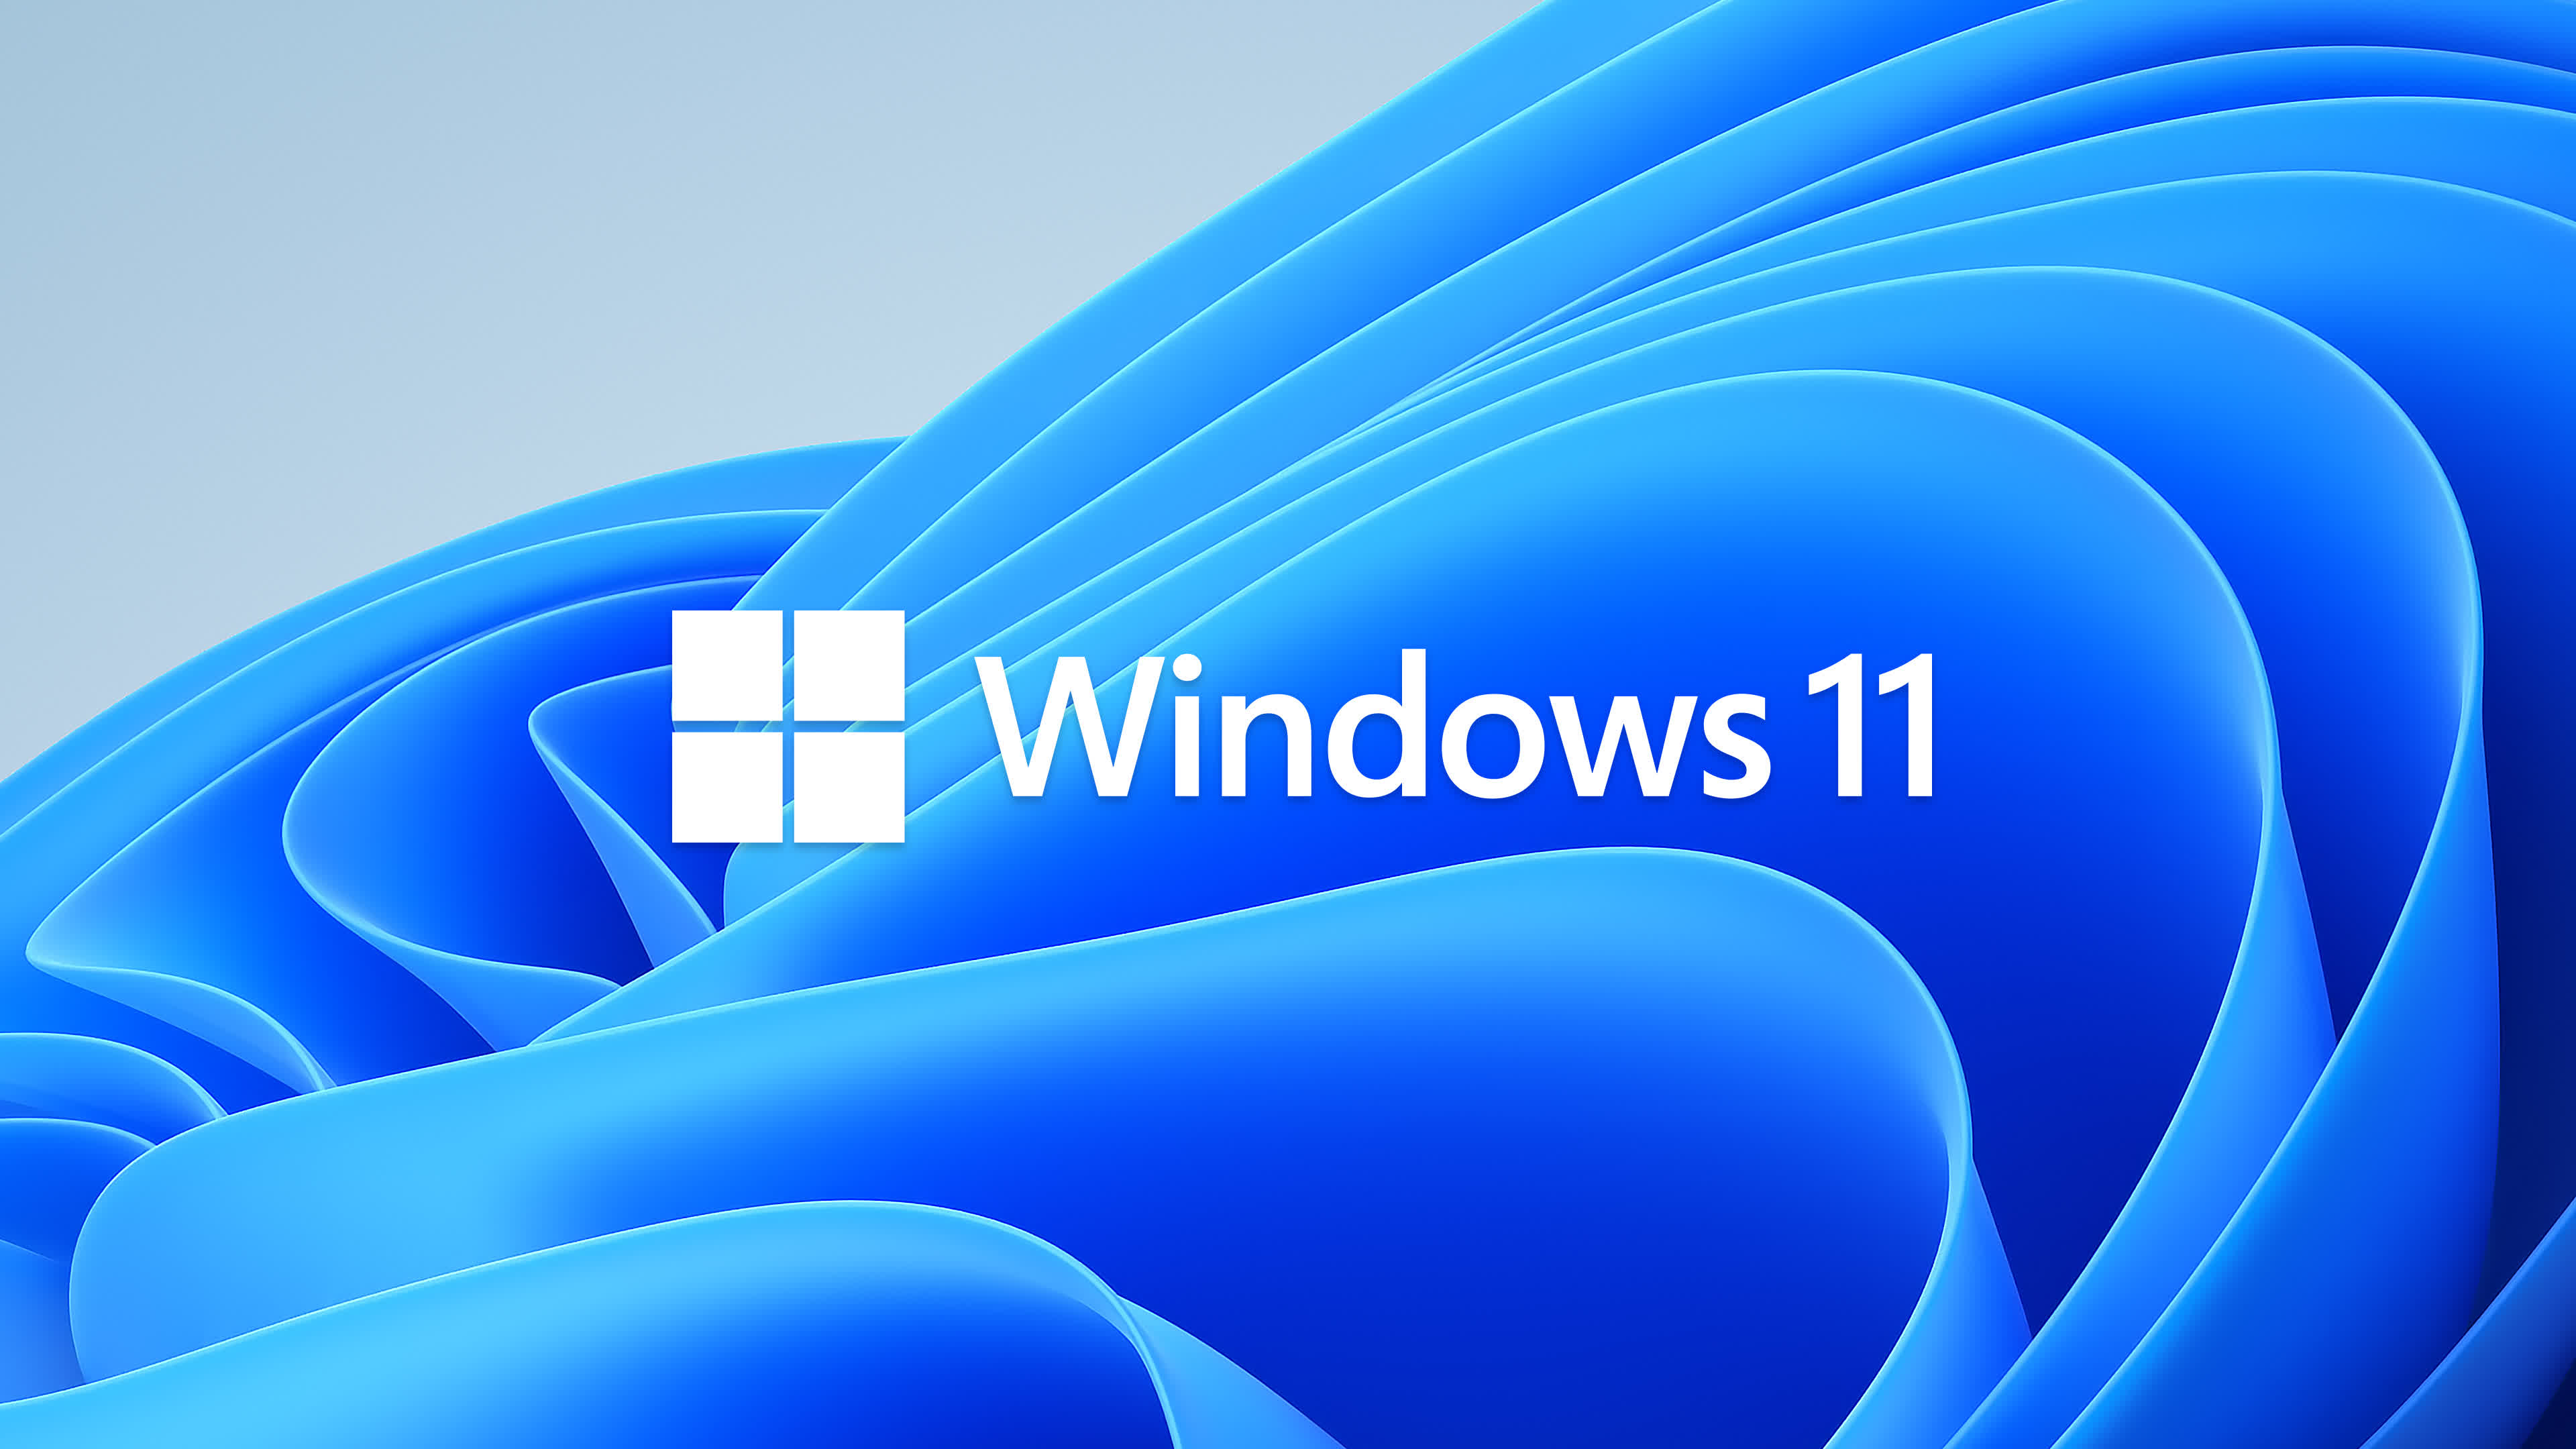 First Windows 11 Insider Preview build is now available on the dev channel